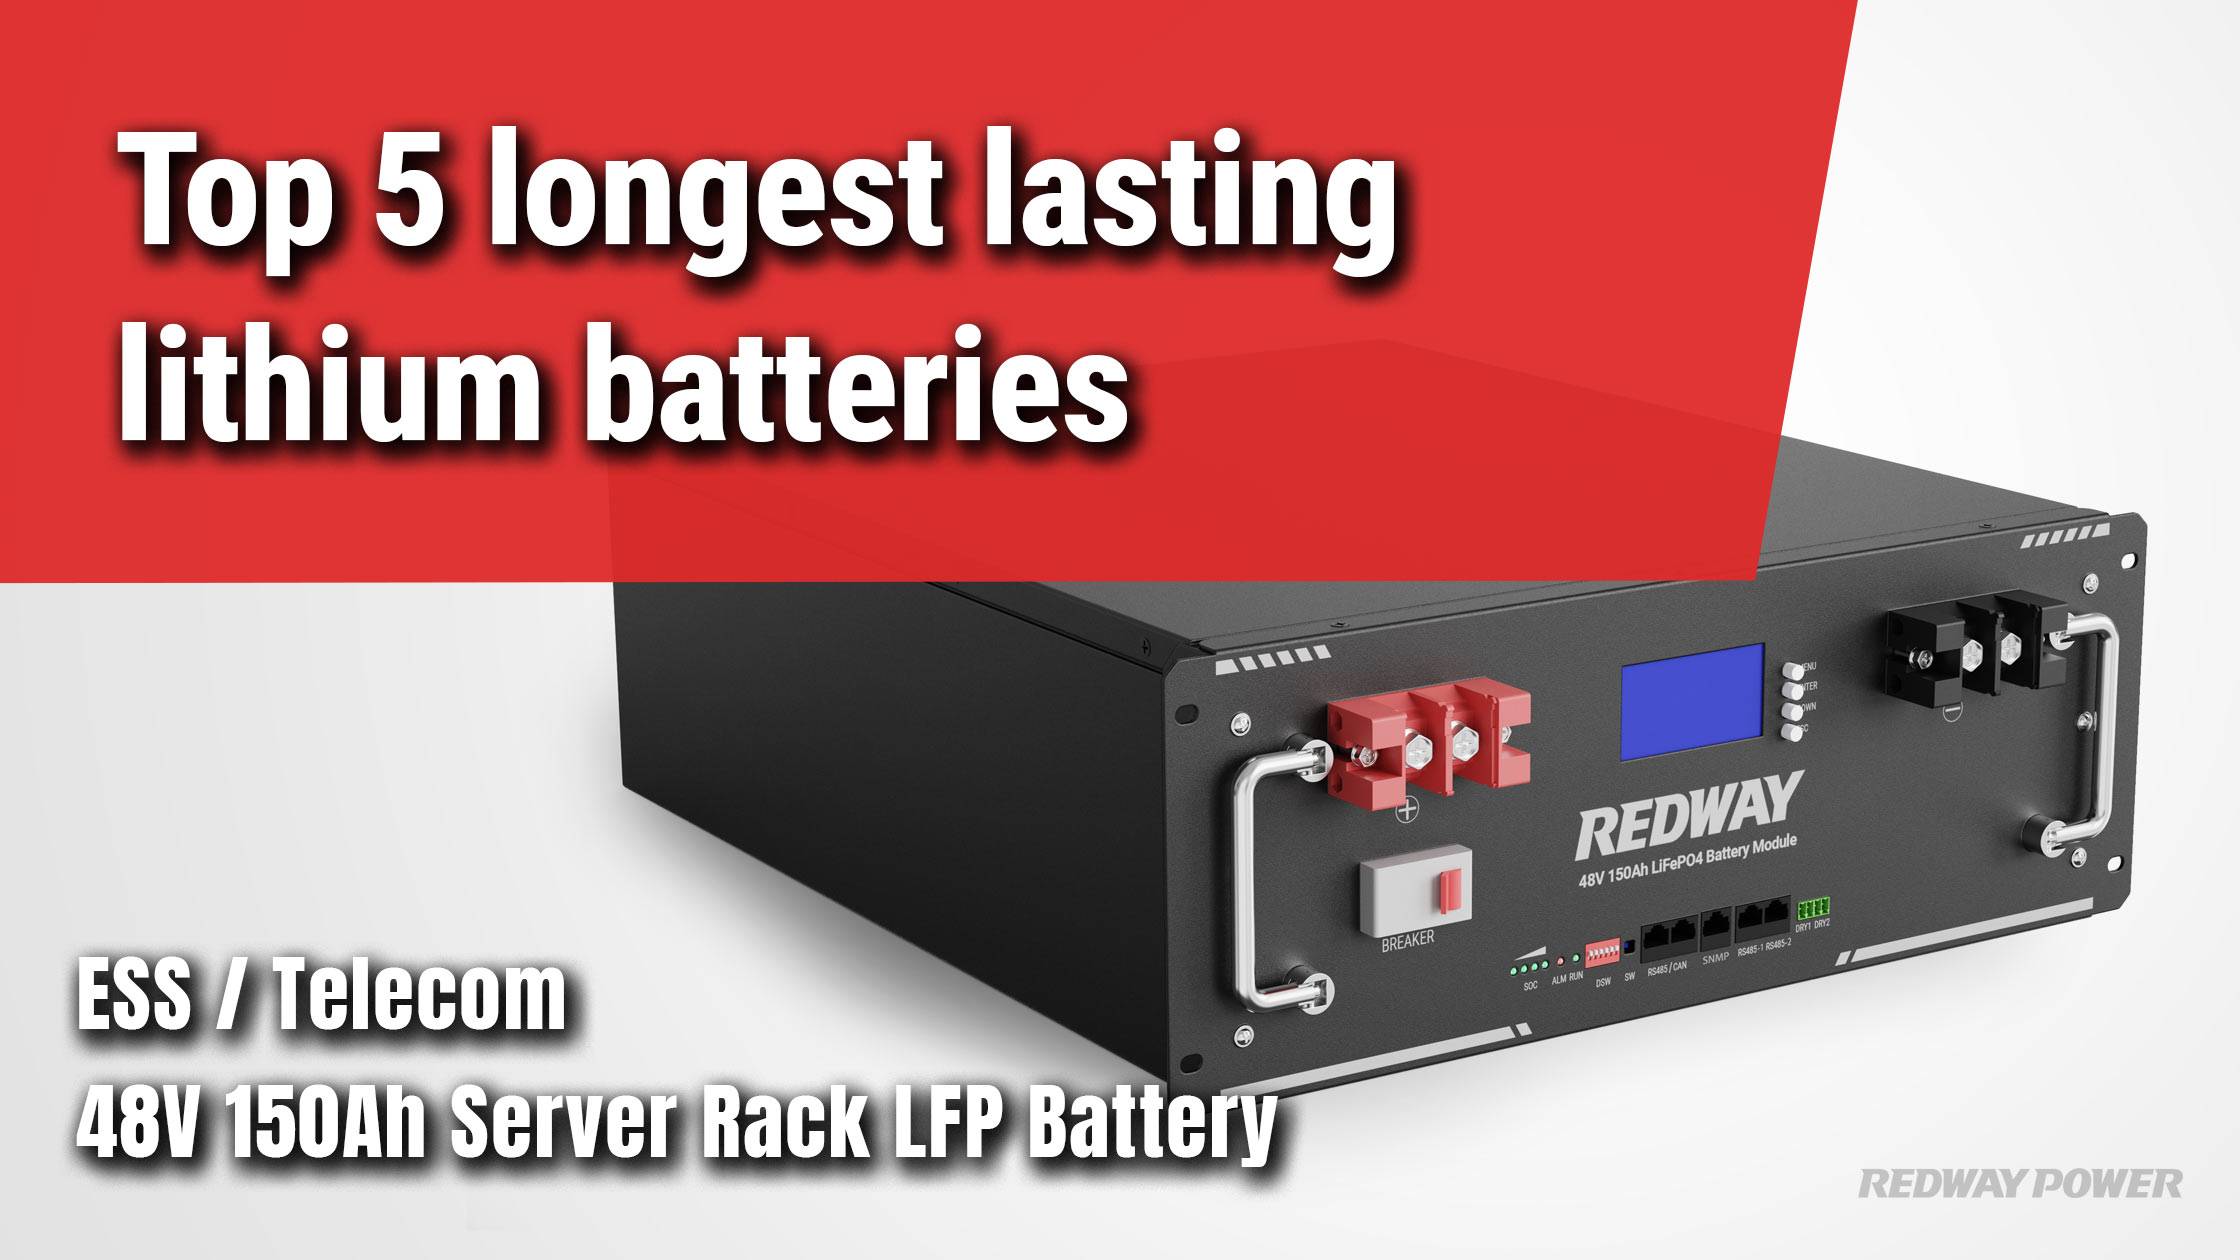 Top 5 longest lasting lithium batteries in the market. What Is The Best Longest Lasting Lithium Battery? 48v 150ah lifepo4 rack battery redway factory